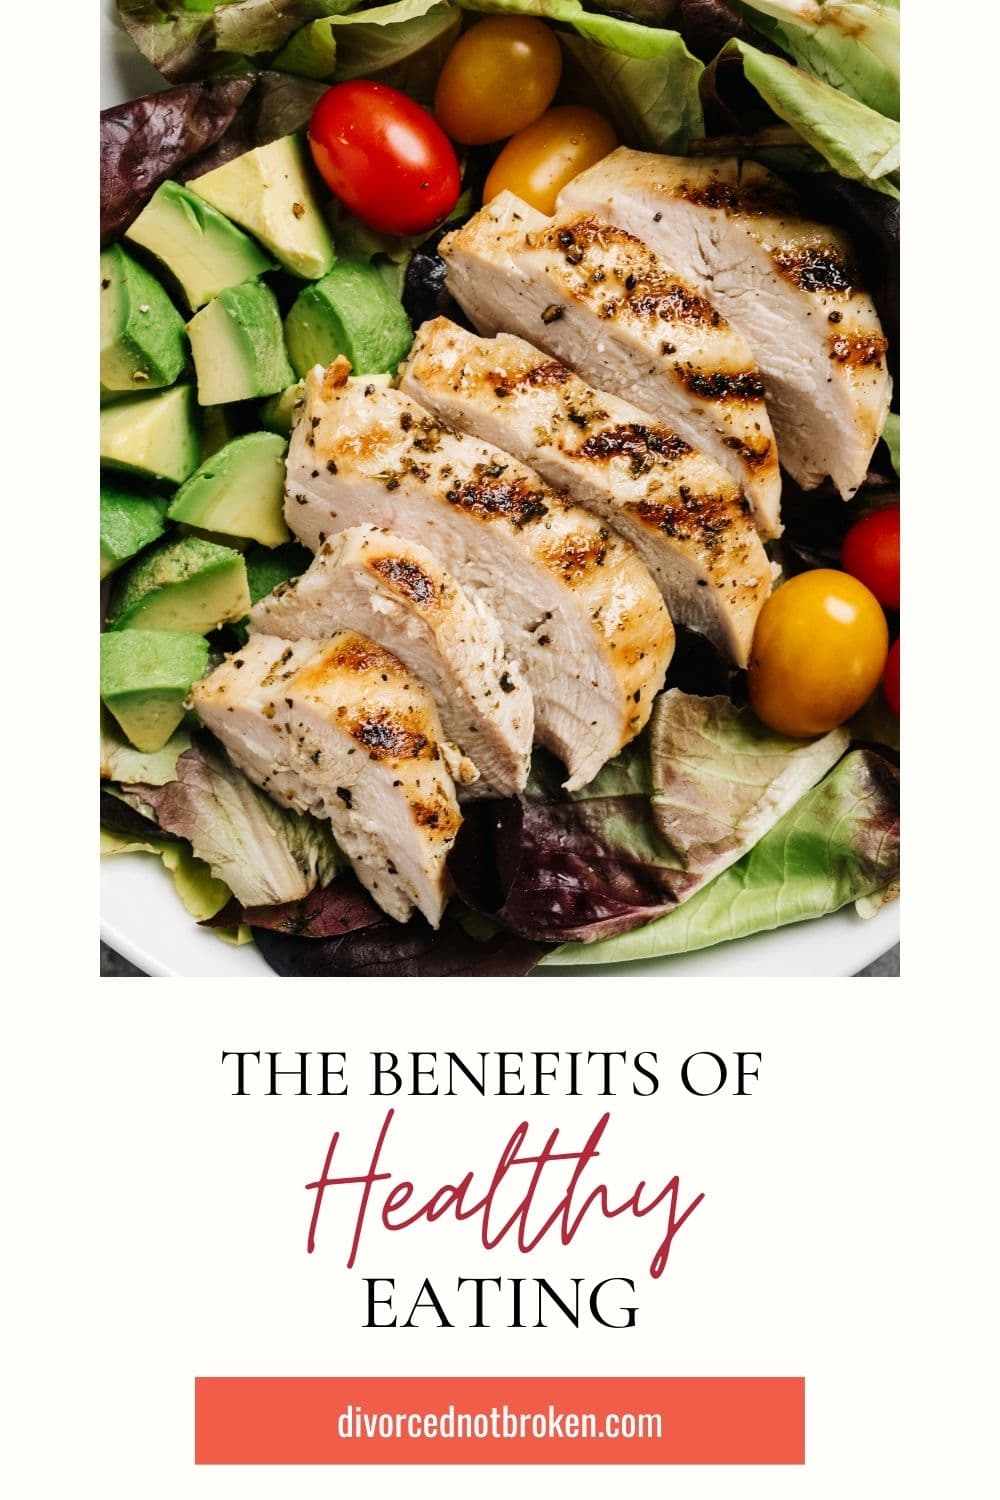 The Benefits of Healthy Eating with image of a chicken salad with lettuce, cherry tomatoes and avocado chunks.